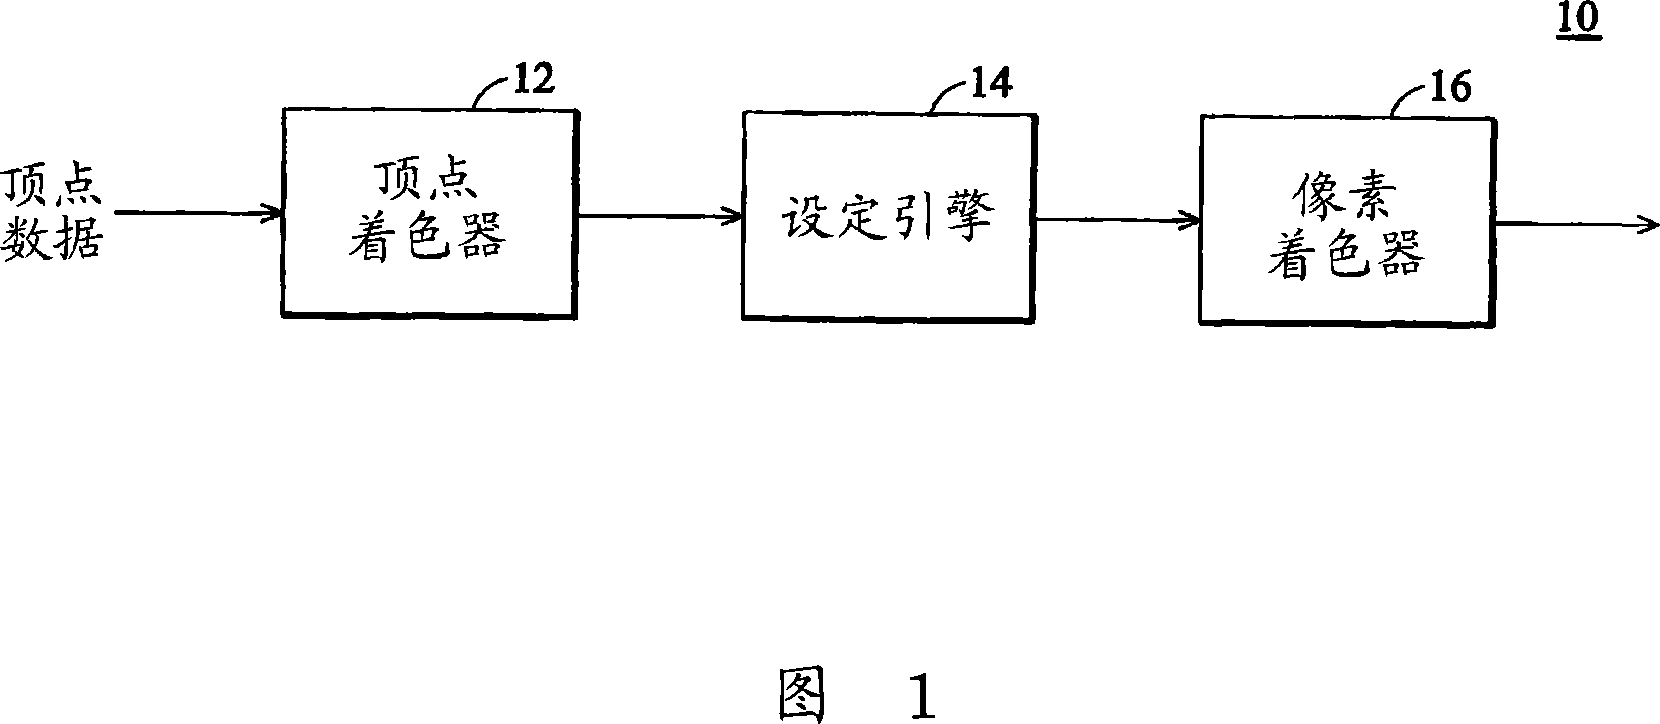 Vertex coloring device, drawing treatment unit and relative process control method